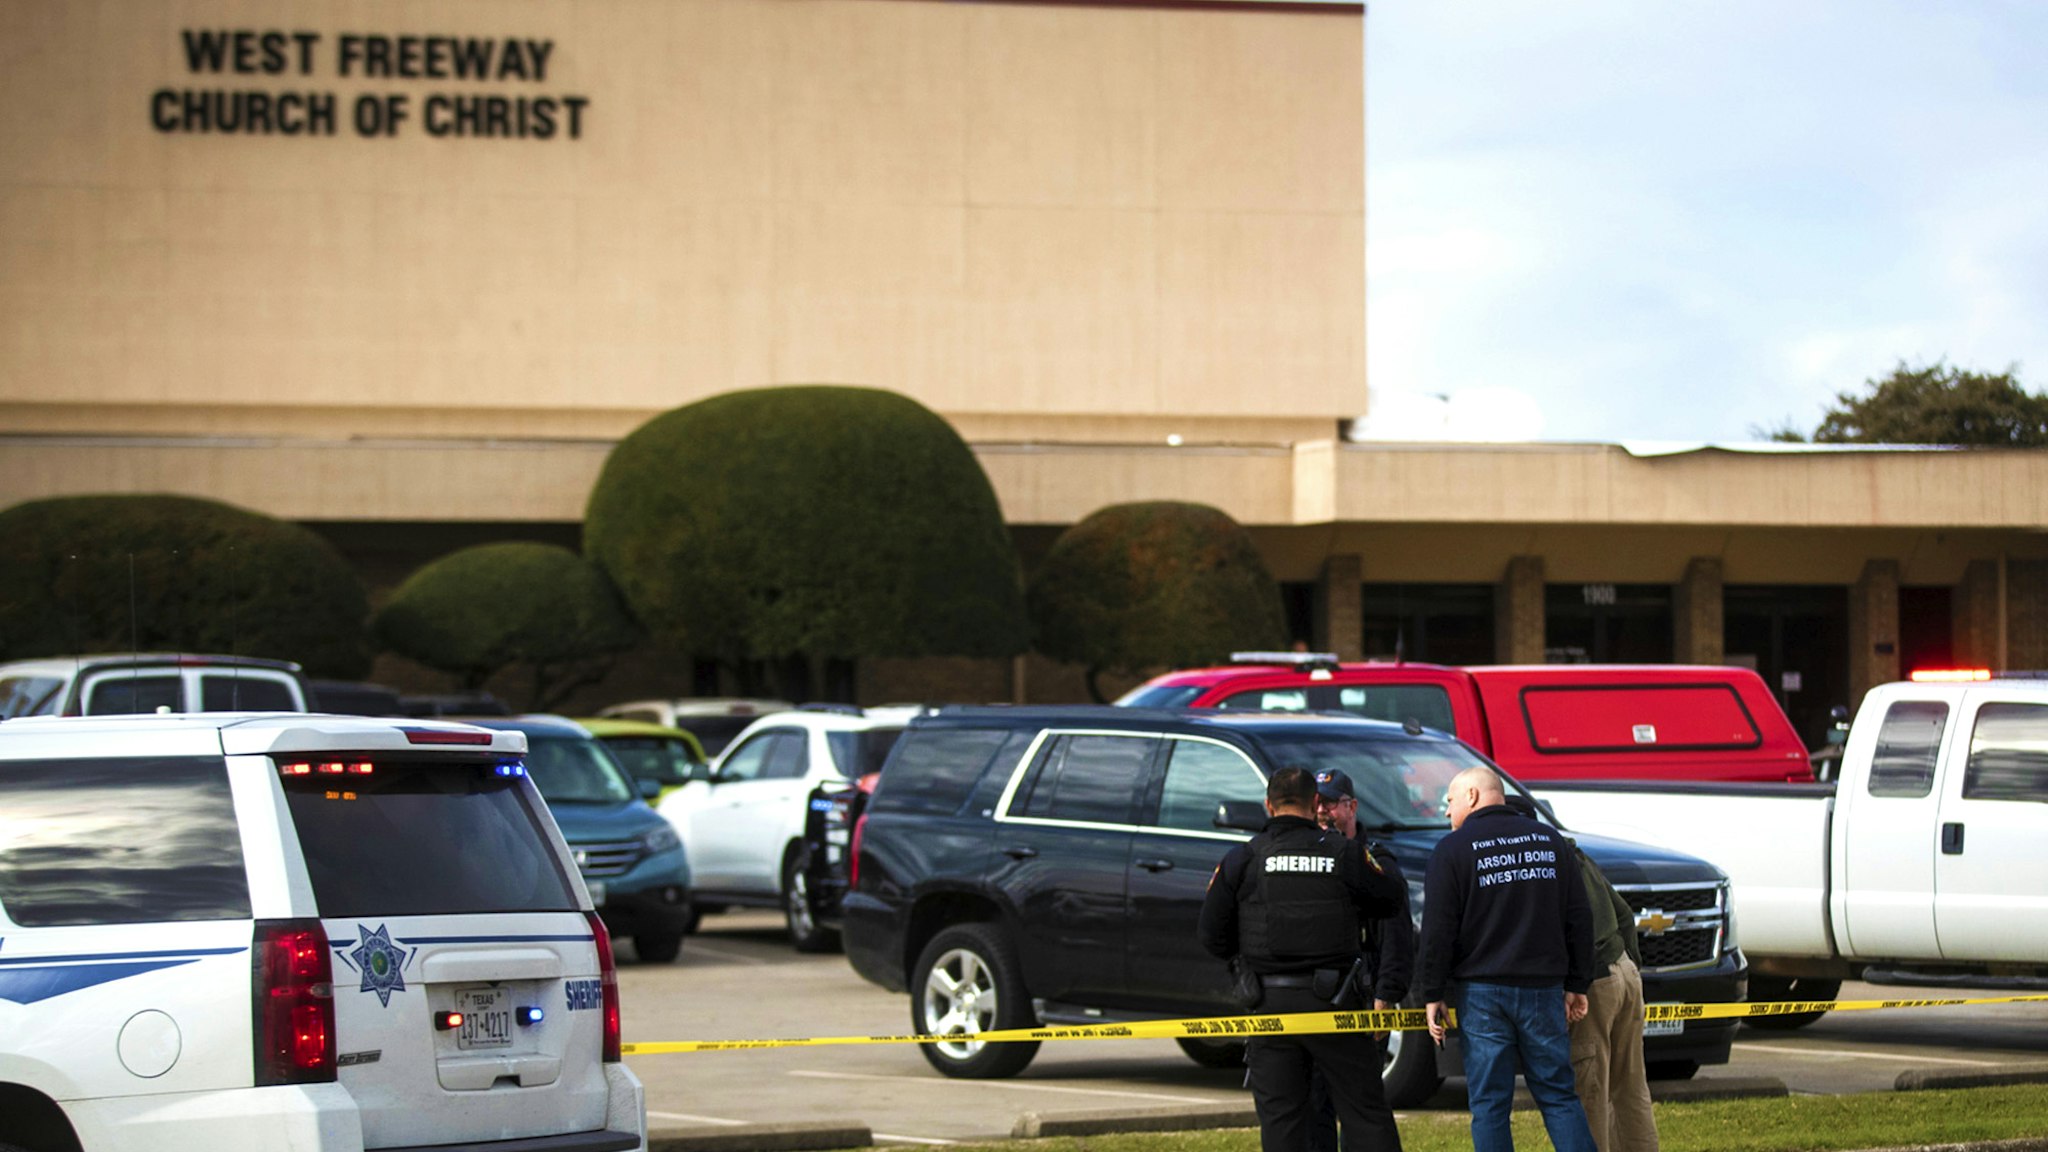 Police and fire department officials surround a scene of a shooting Sunday, Dec. 29, 2019, at West Freeway Church of Christ in White Settlement, Texas.